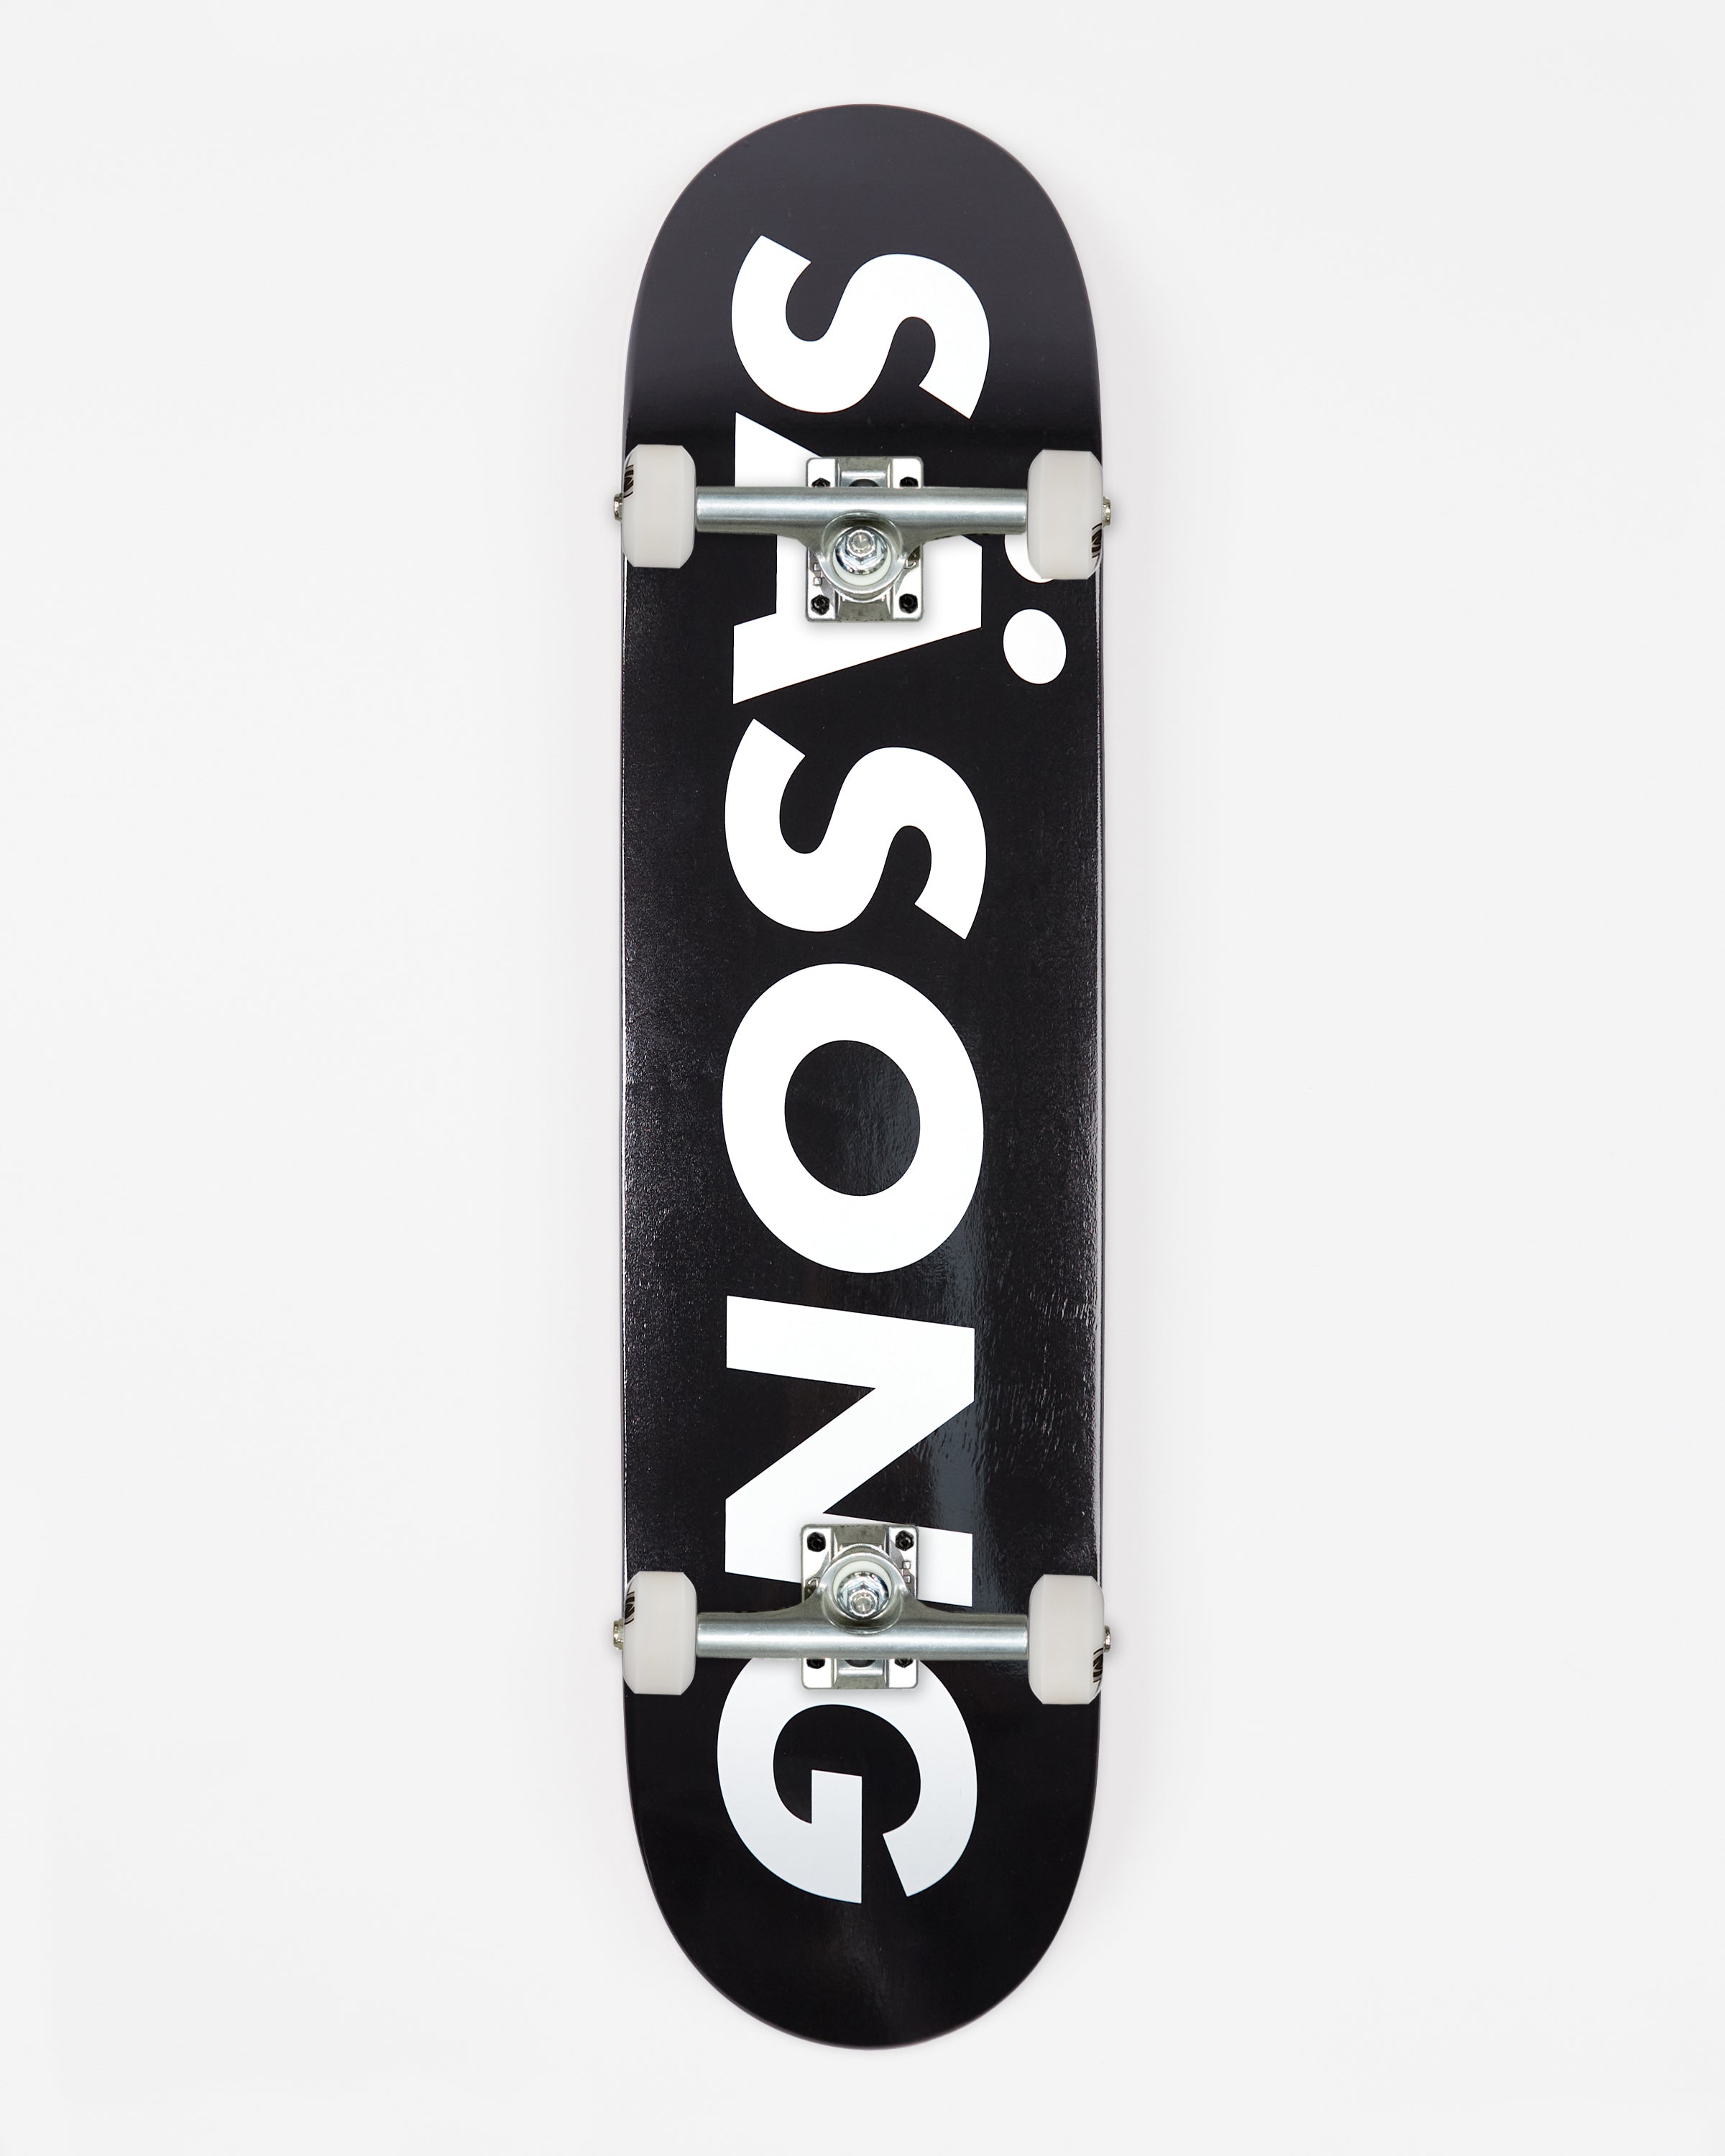 Complete Säsong Skateboard - 8.25", Ace Trucks, Pig Wheels and Independent Hardware